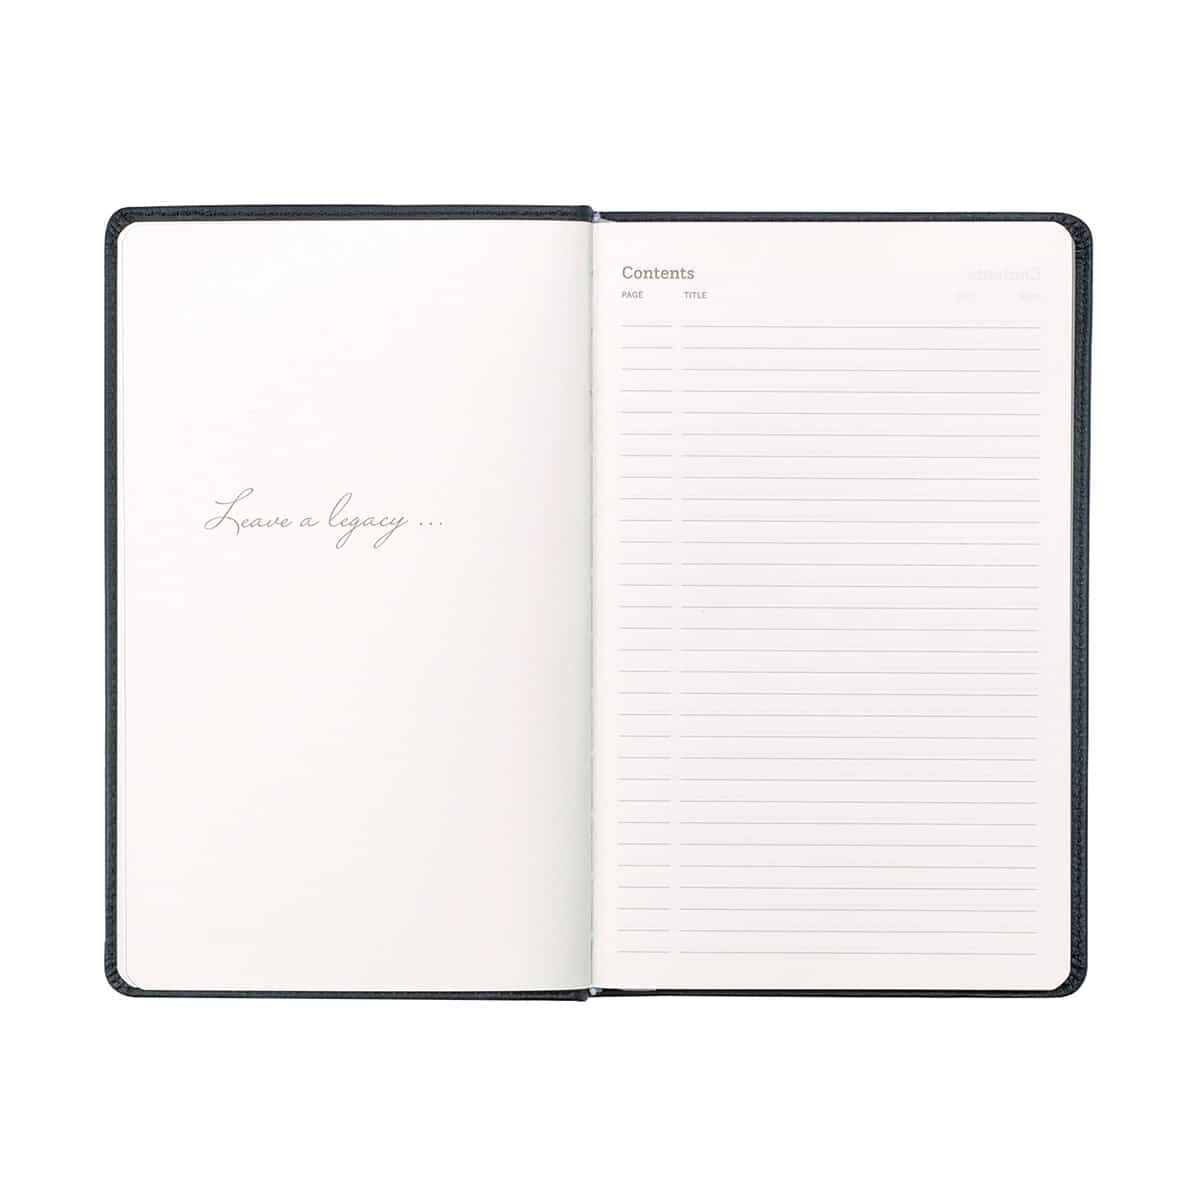 Large Tuxedo Black journal with open front cover with "Leave a Legacy" inscription and Table of Contents